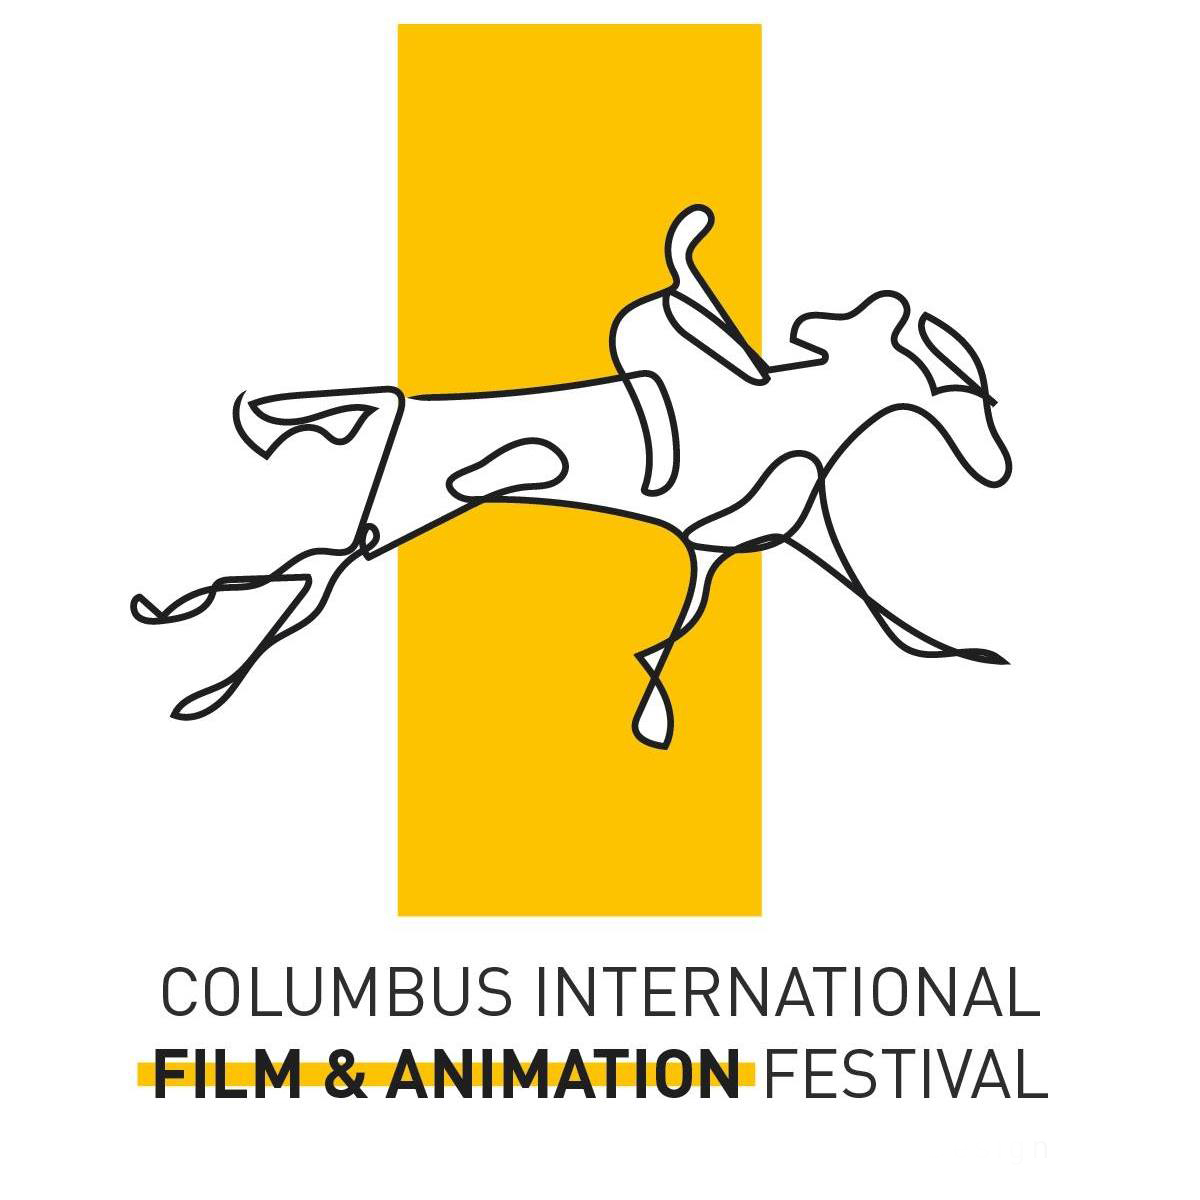 Welcome to the 71st Columbus International Film and Animation Festival